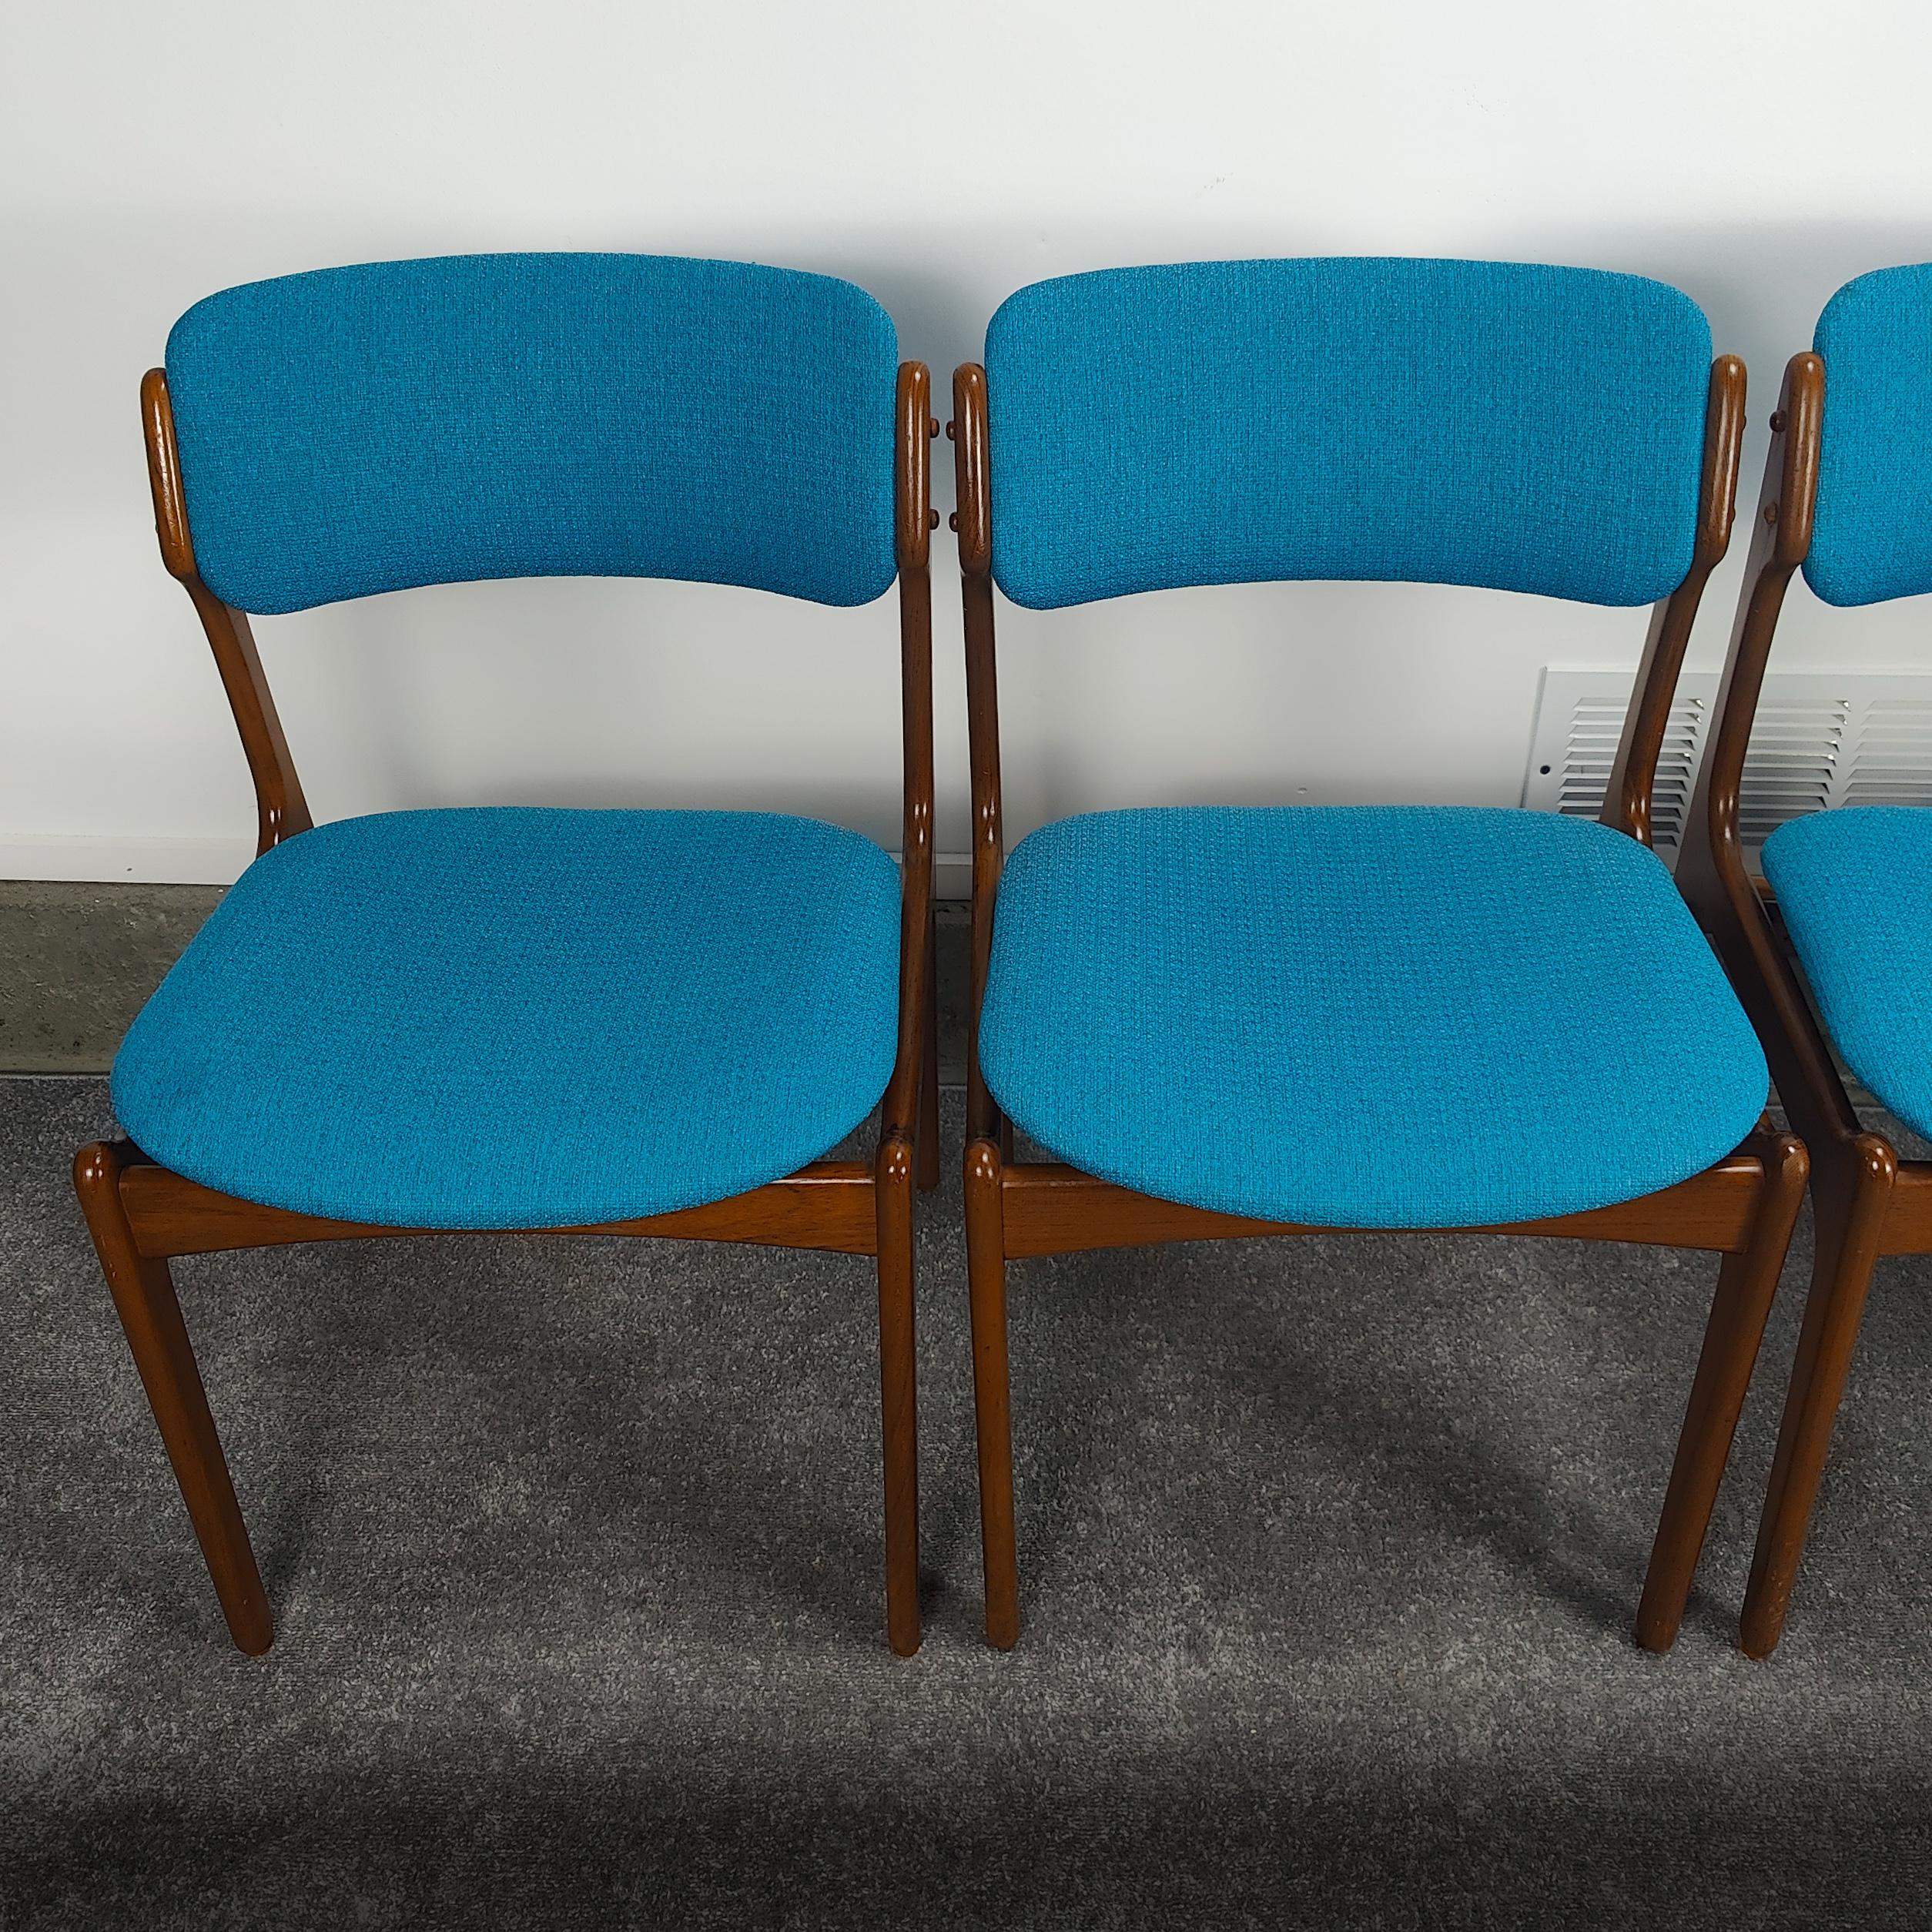 20th Century Vintage Mid-Century Modern Teak Dining Chairs by Erik Buch for O.D. Mobler